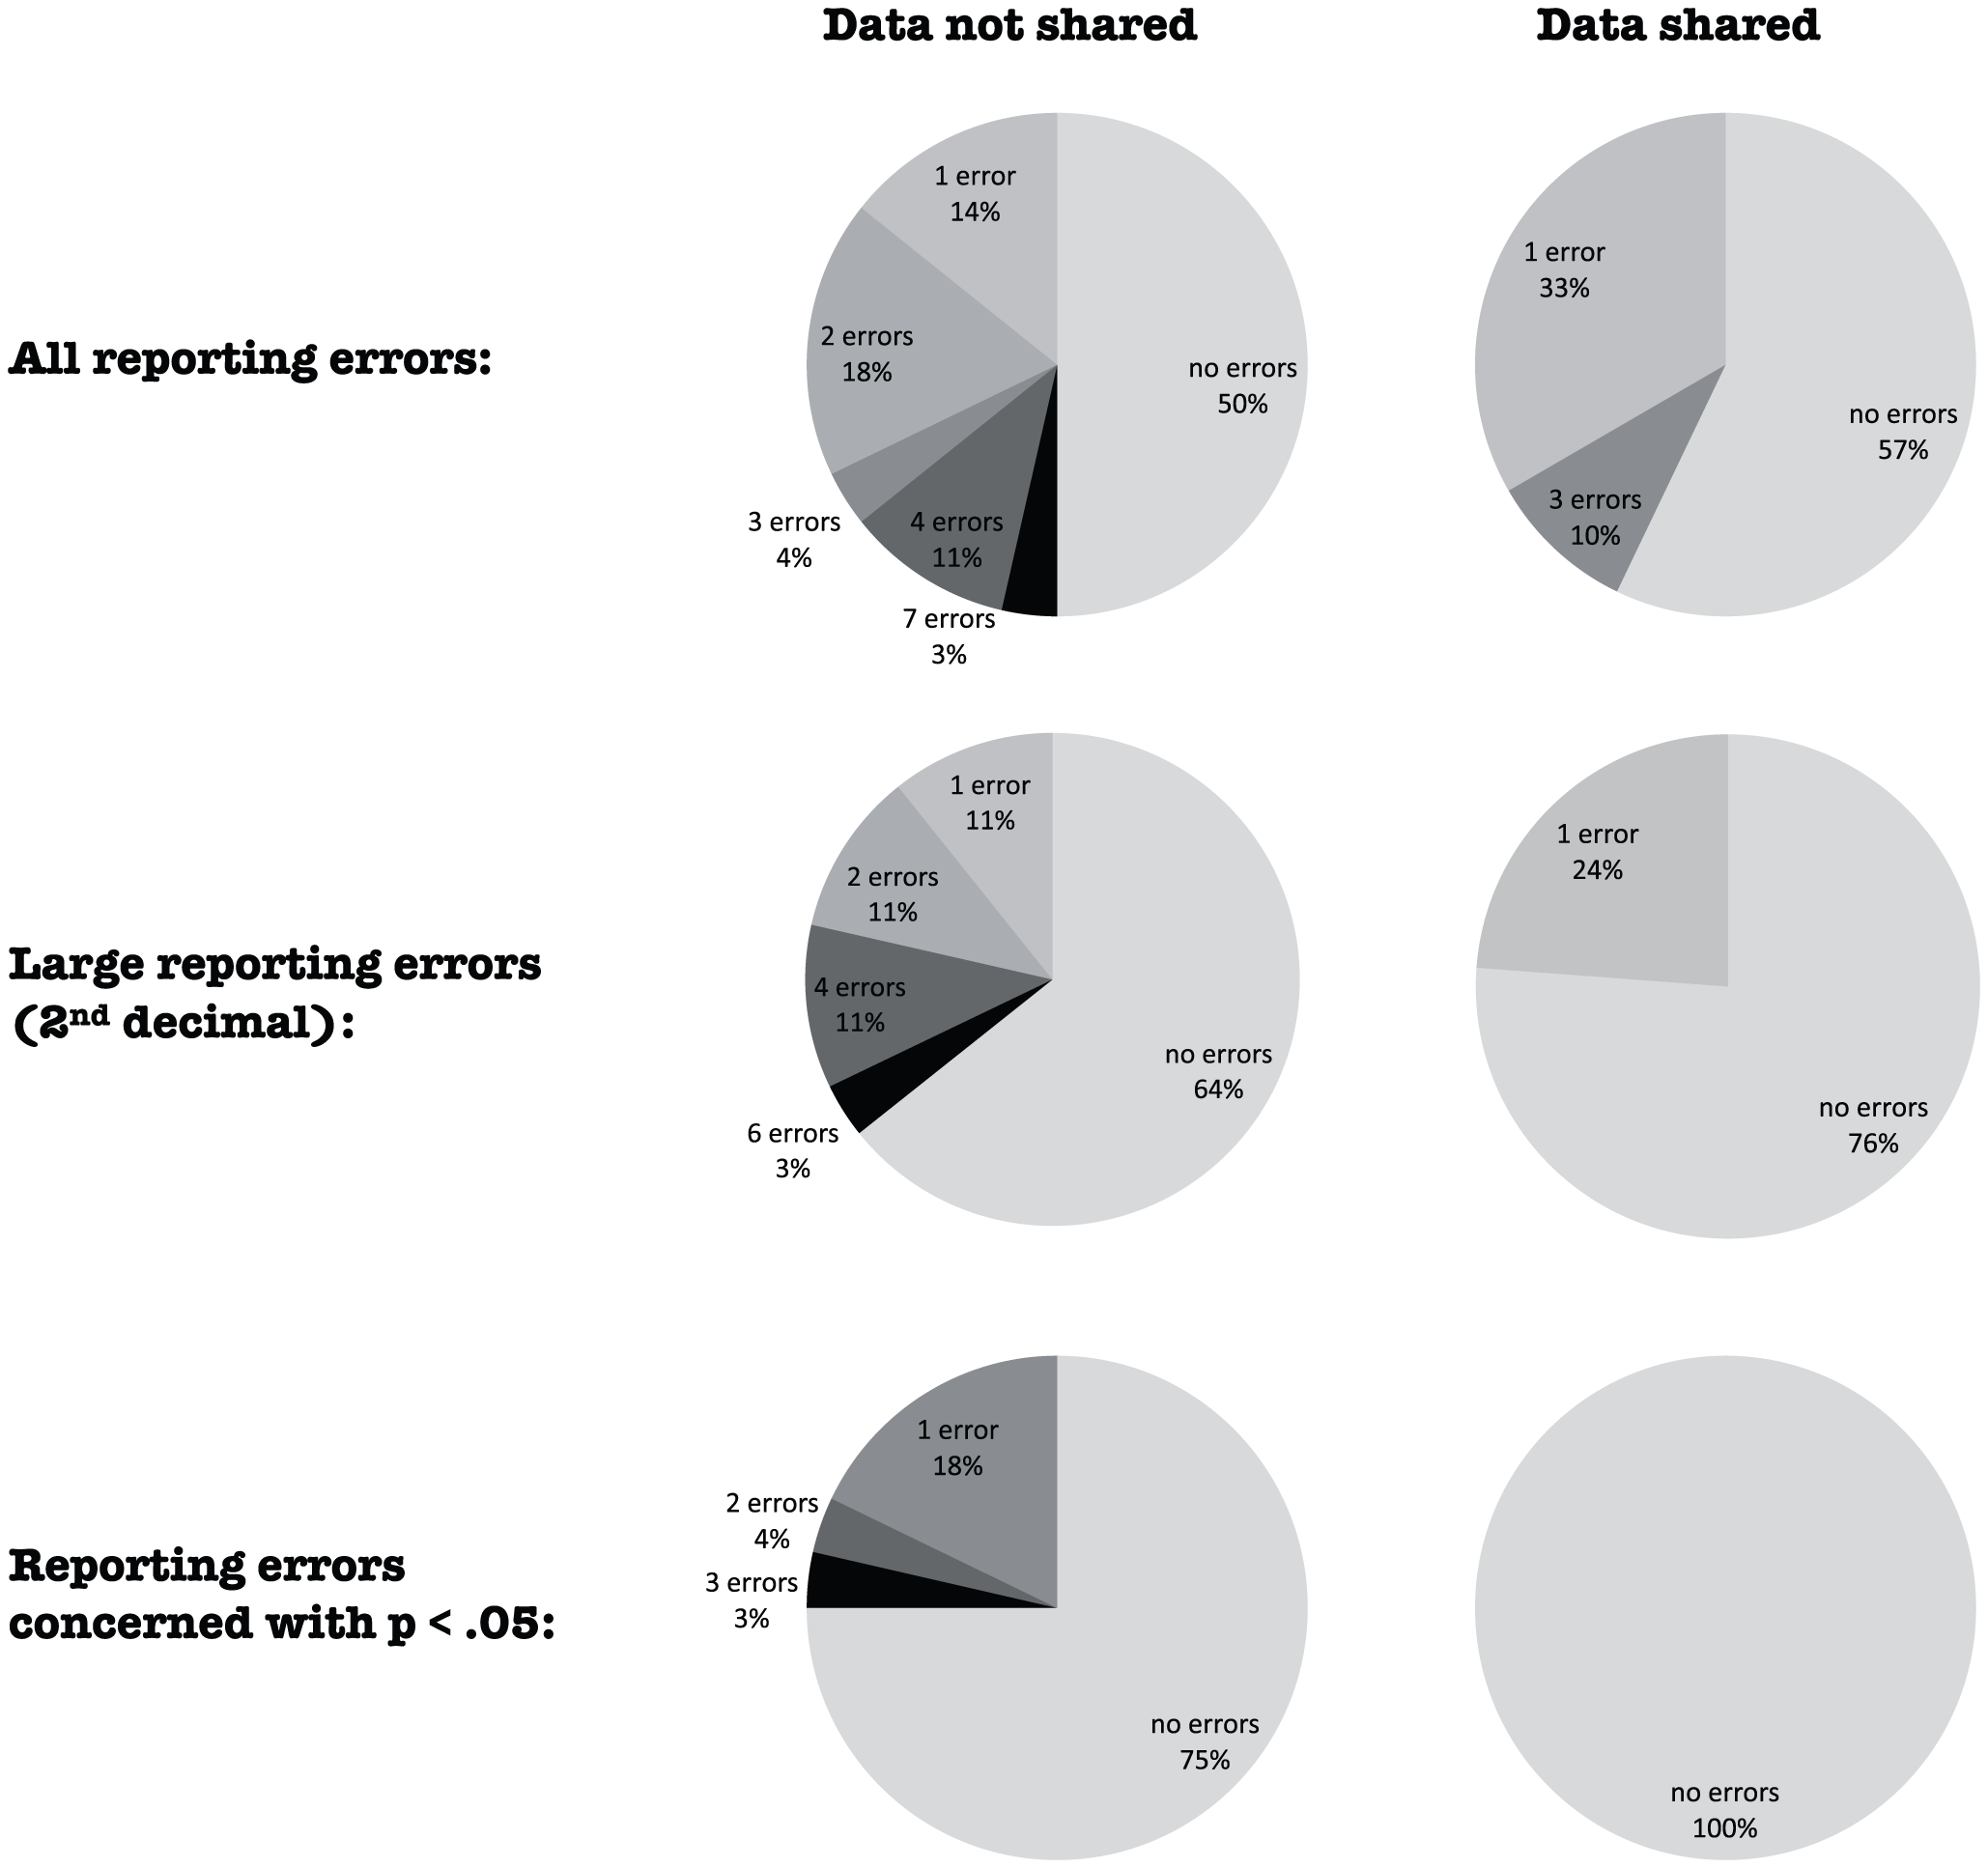 Distribution of reporting errors per paper for papers from which data were shared and from which no data were shared